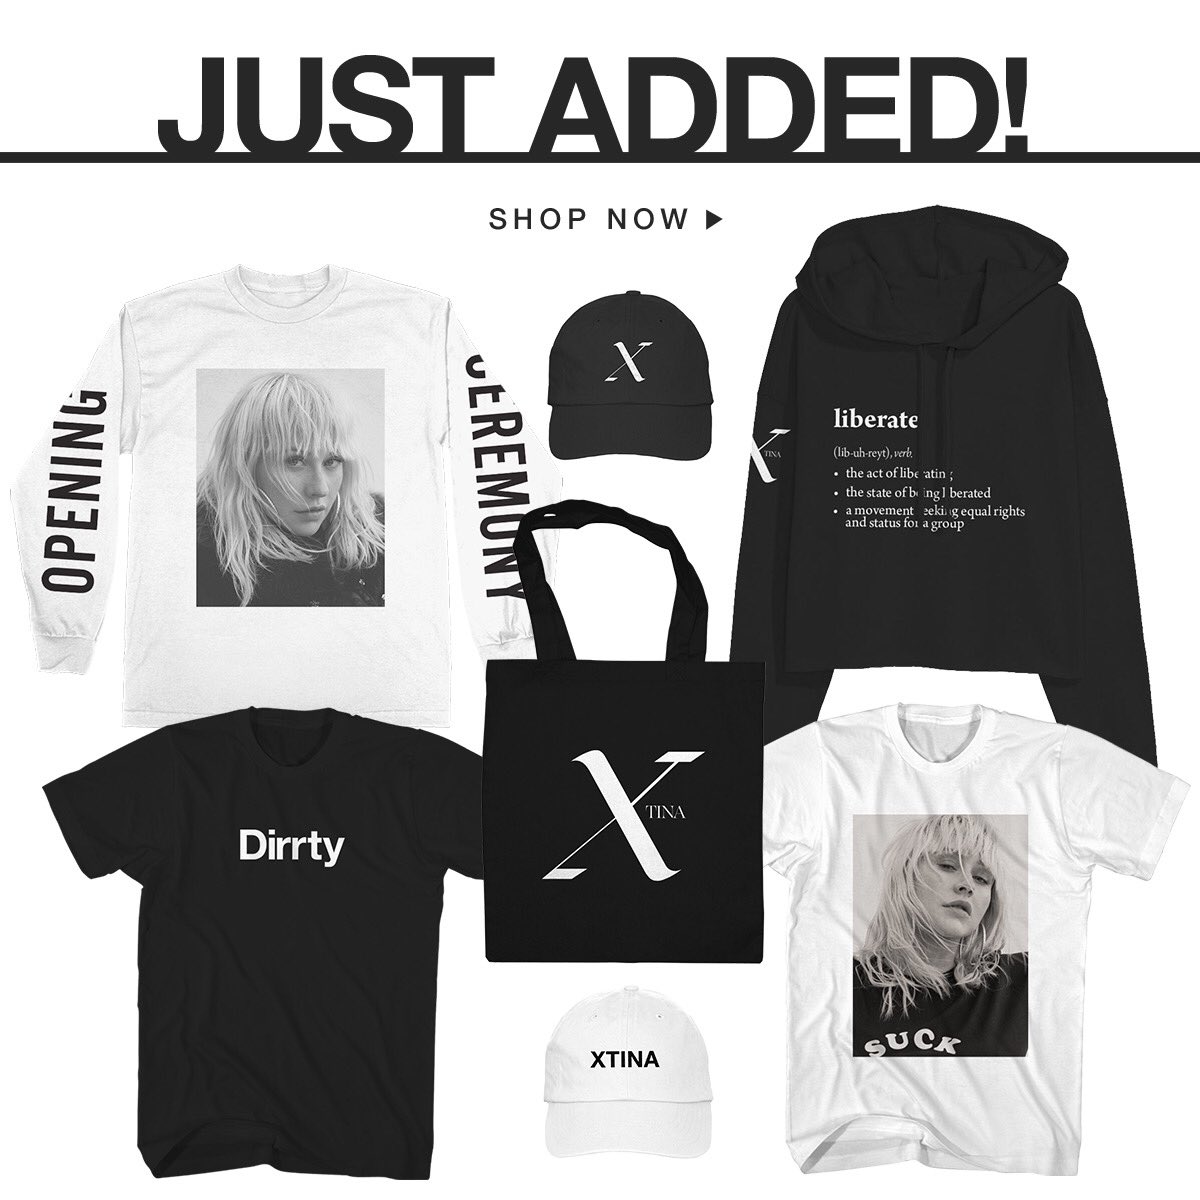 Exclusive tour merch is now available online for a limited time only – shop now:  https://t.co/ZxmVMQIJXB ???? https://t.co/BOZsxl4bMq